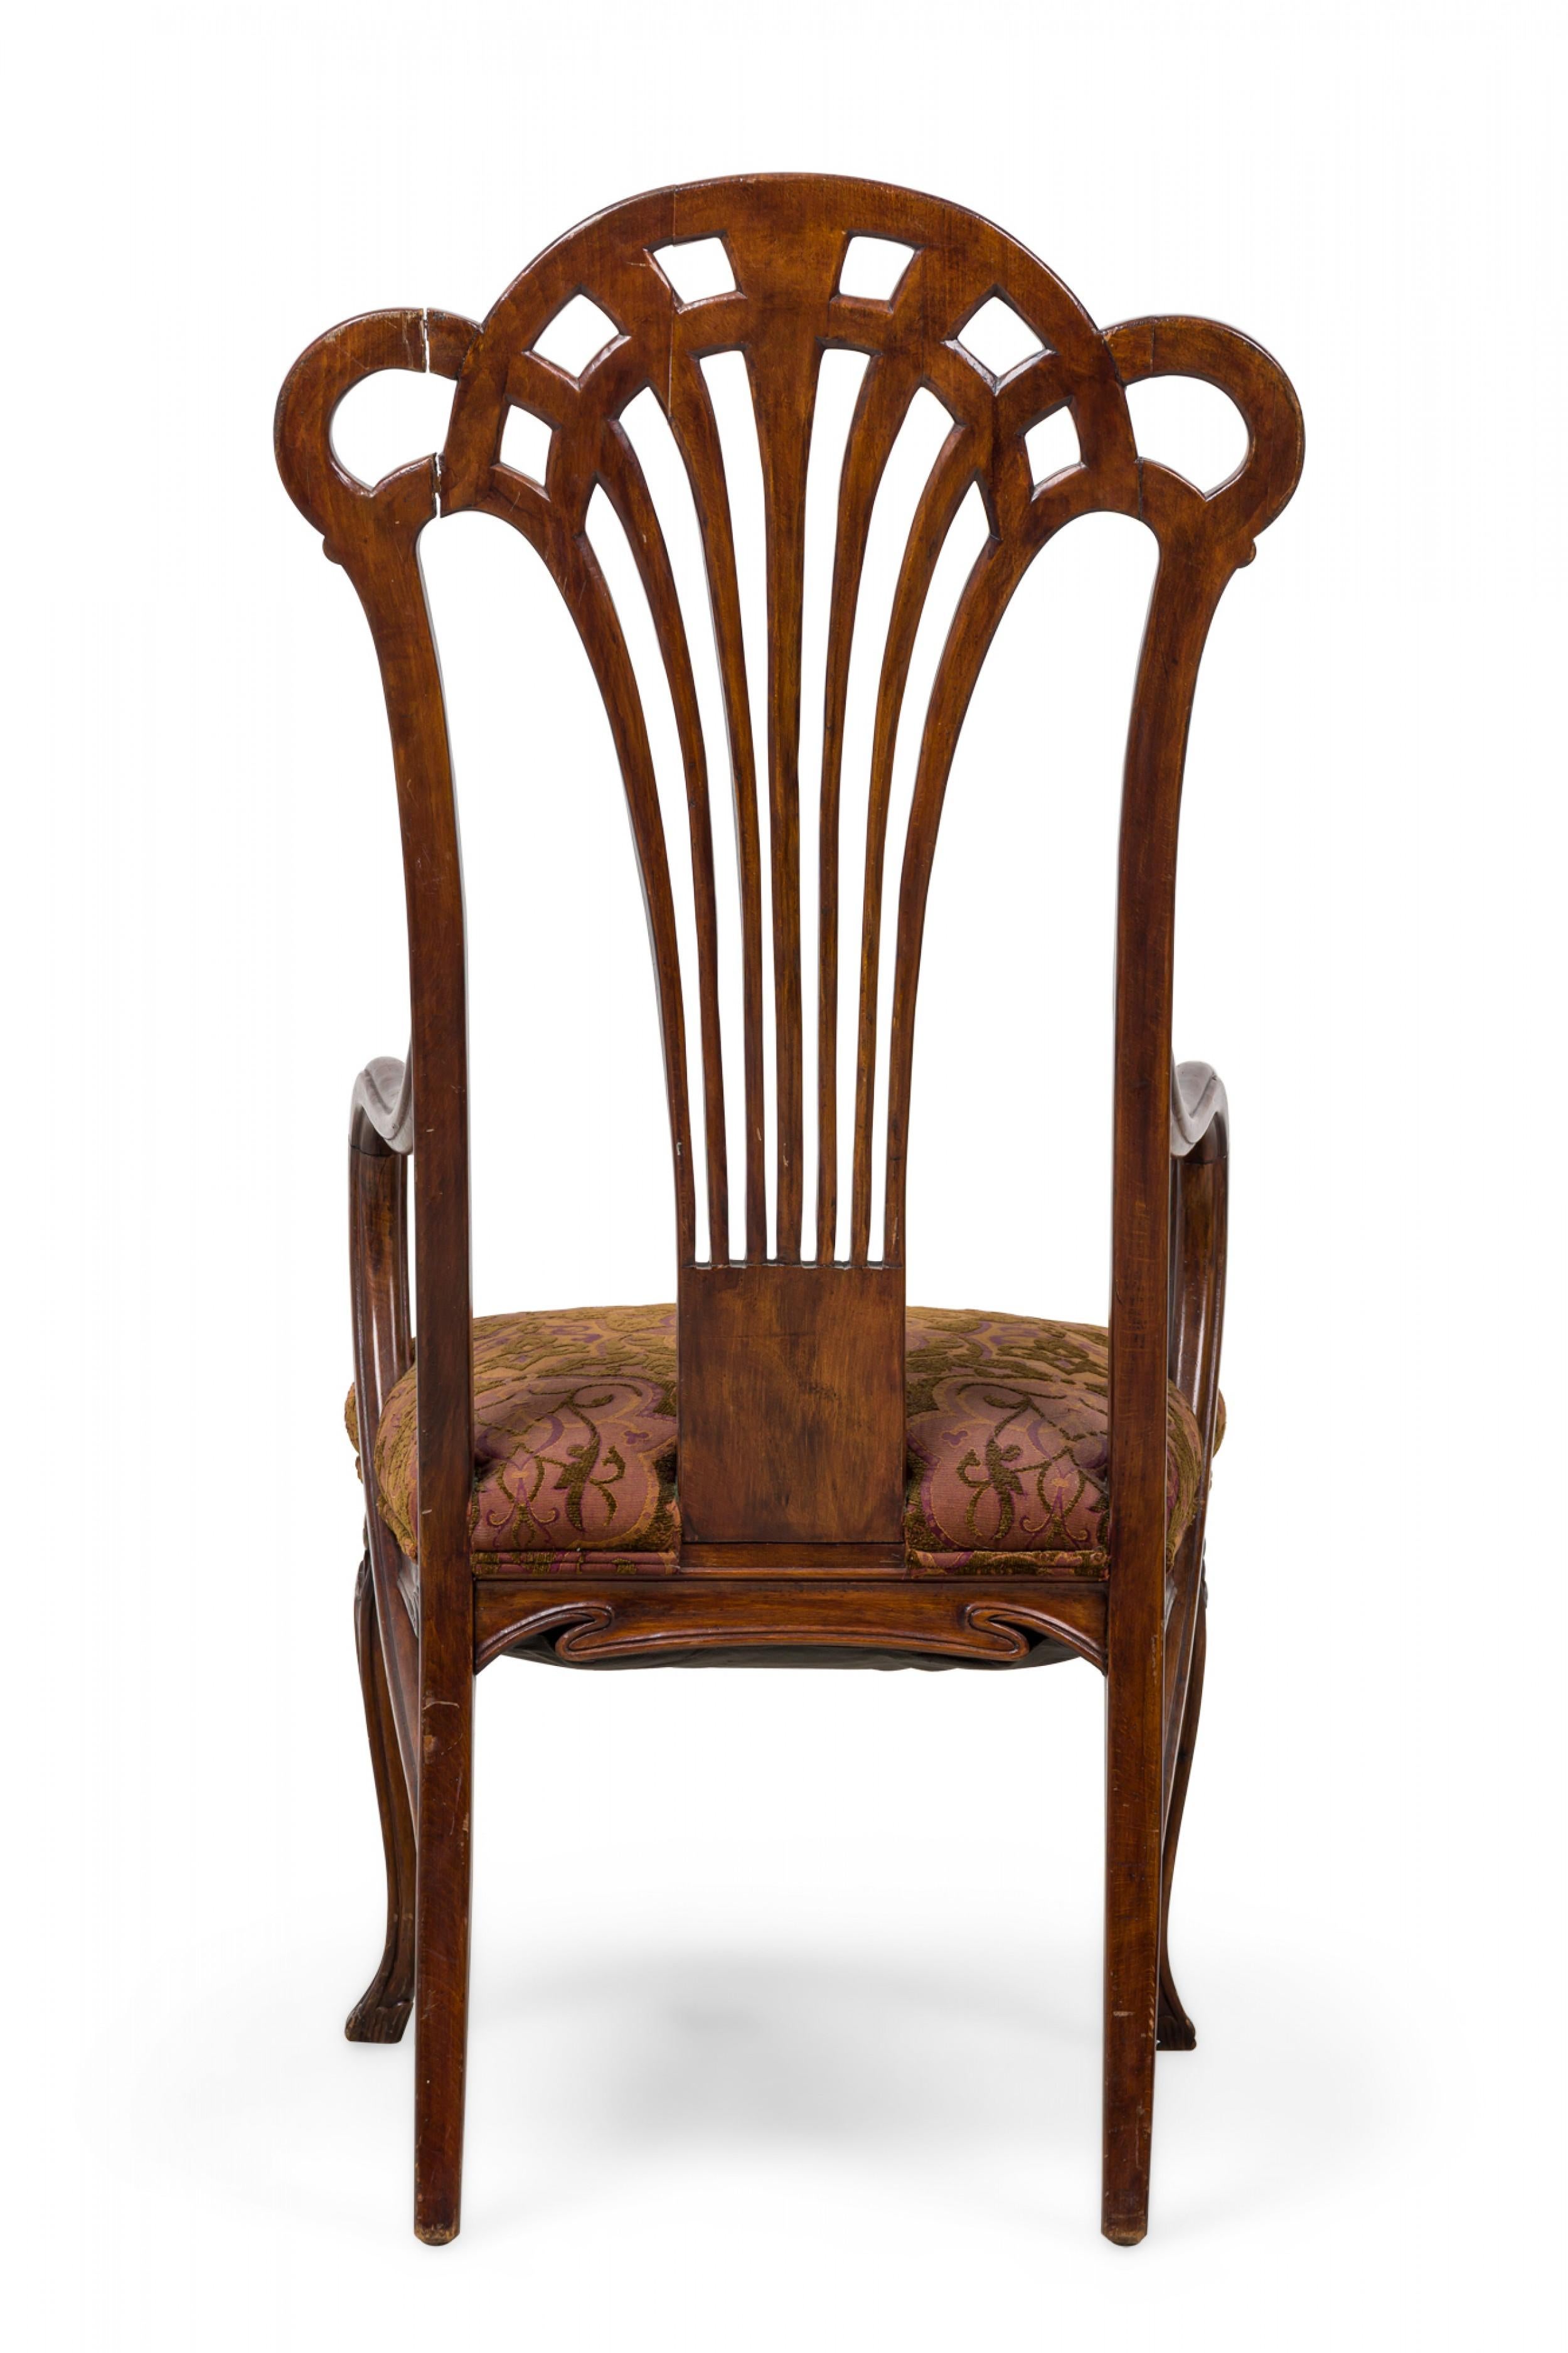 Eugene Gaillard Art Nouveau French Mahogany Upholstered Armchair For Sale 1